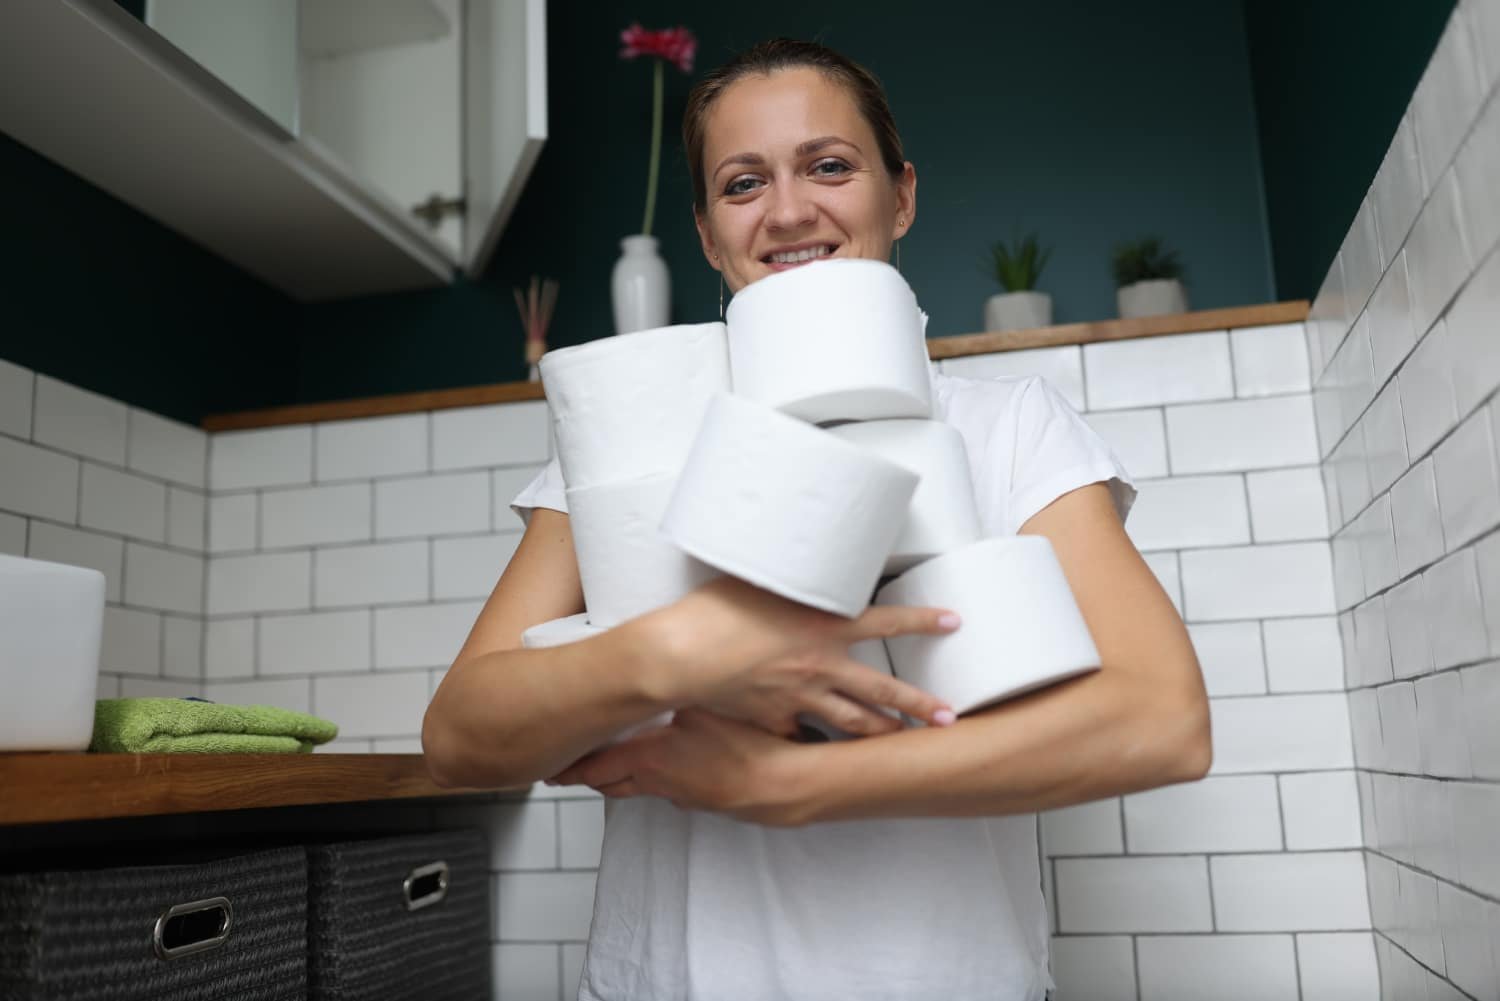 Make A Difference With Who Gives A Crap’s Eco-Friendly Toilet Paper